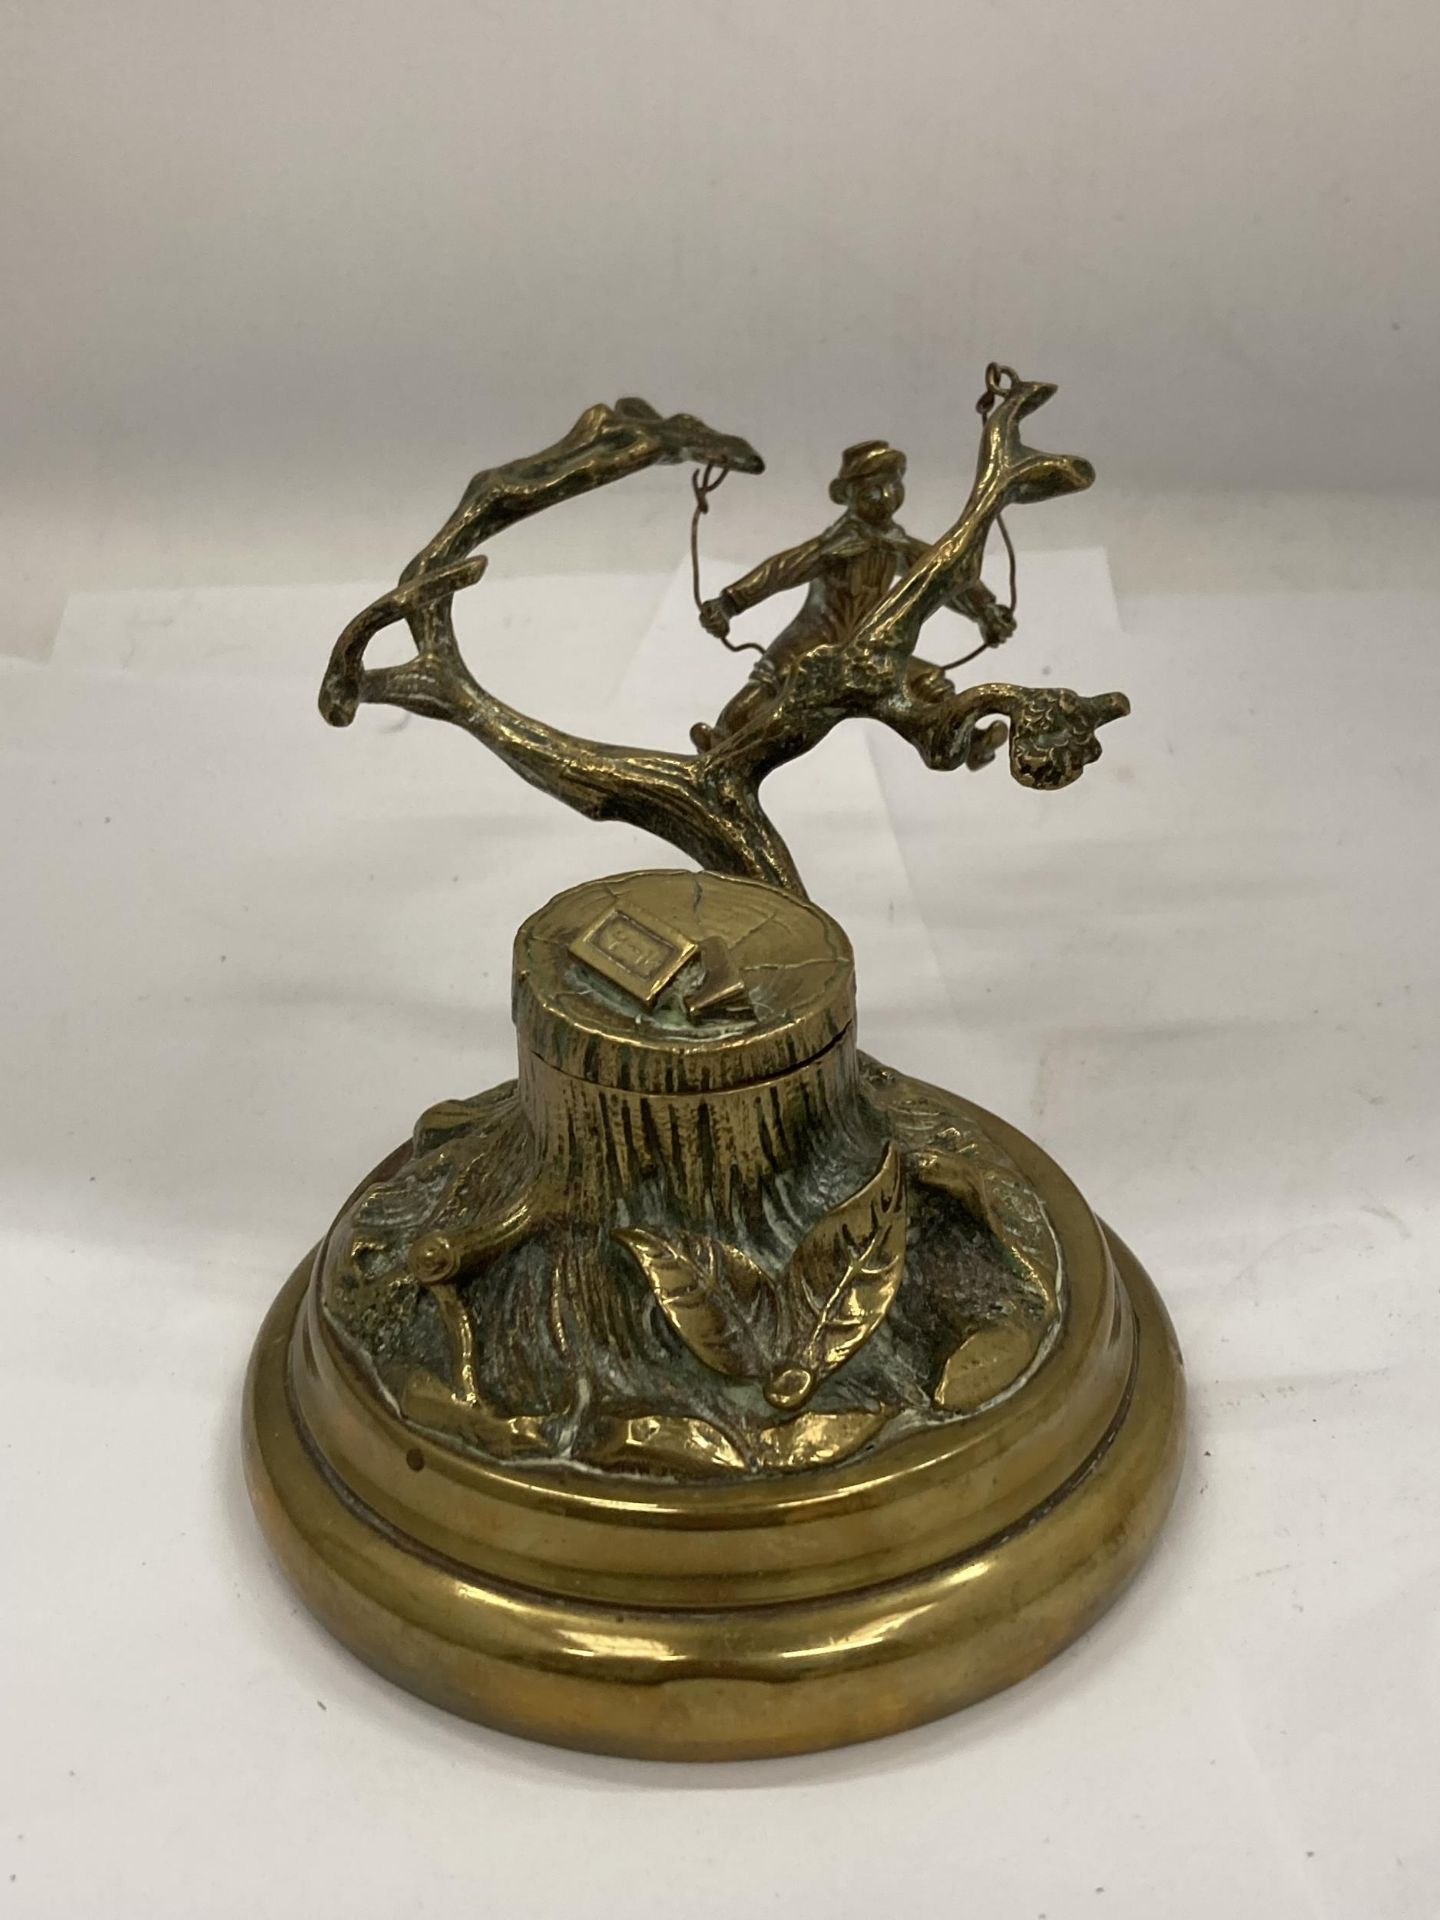 A VINTAGE NOVELTY BRASS INKWELL WITH A SINGING BOY IN A TREE